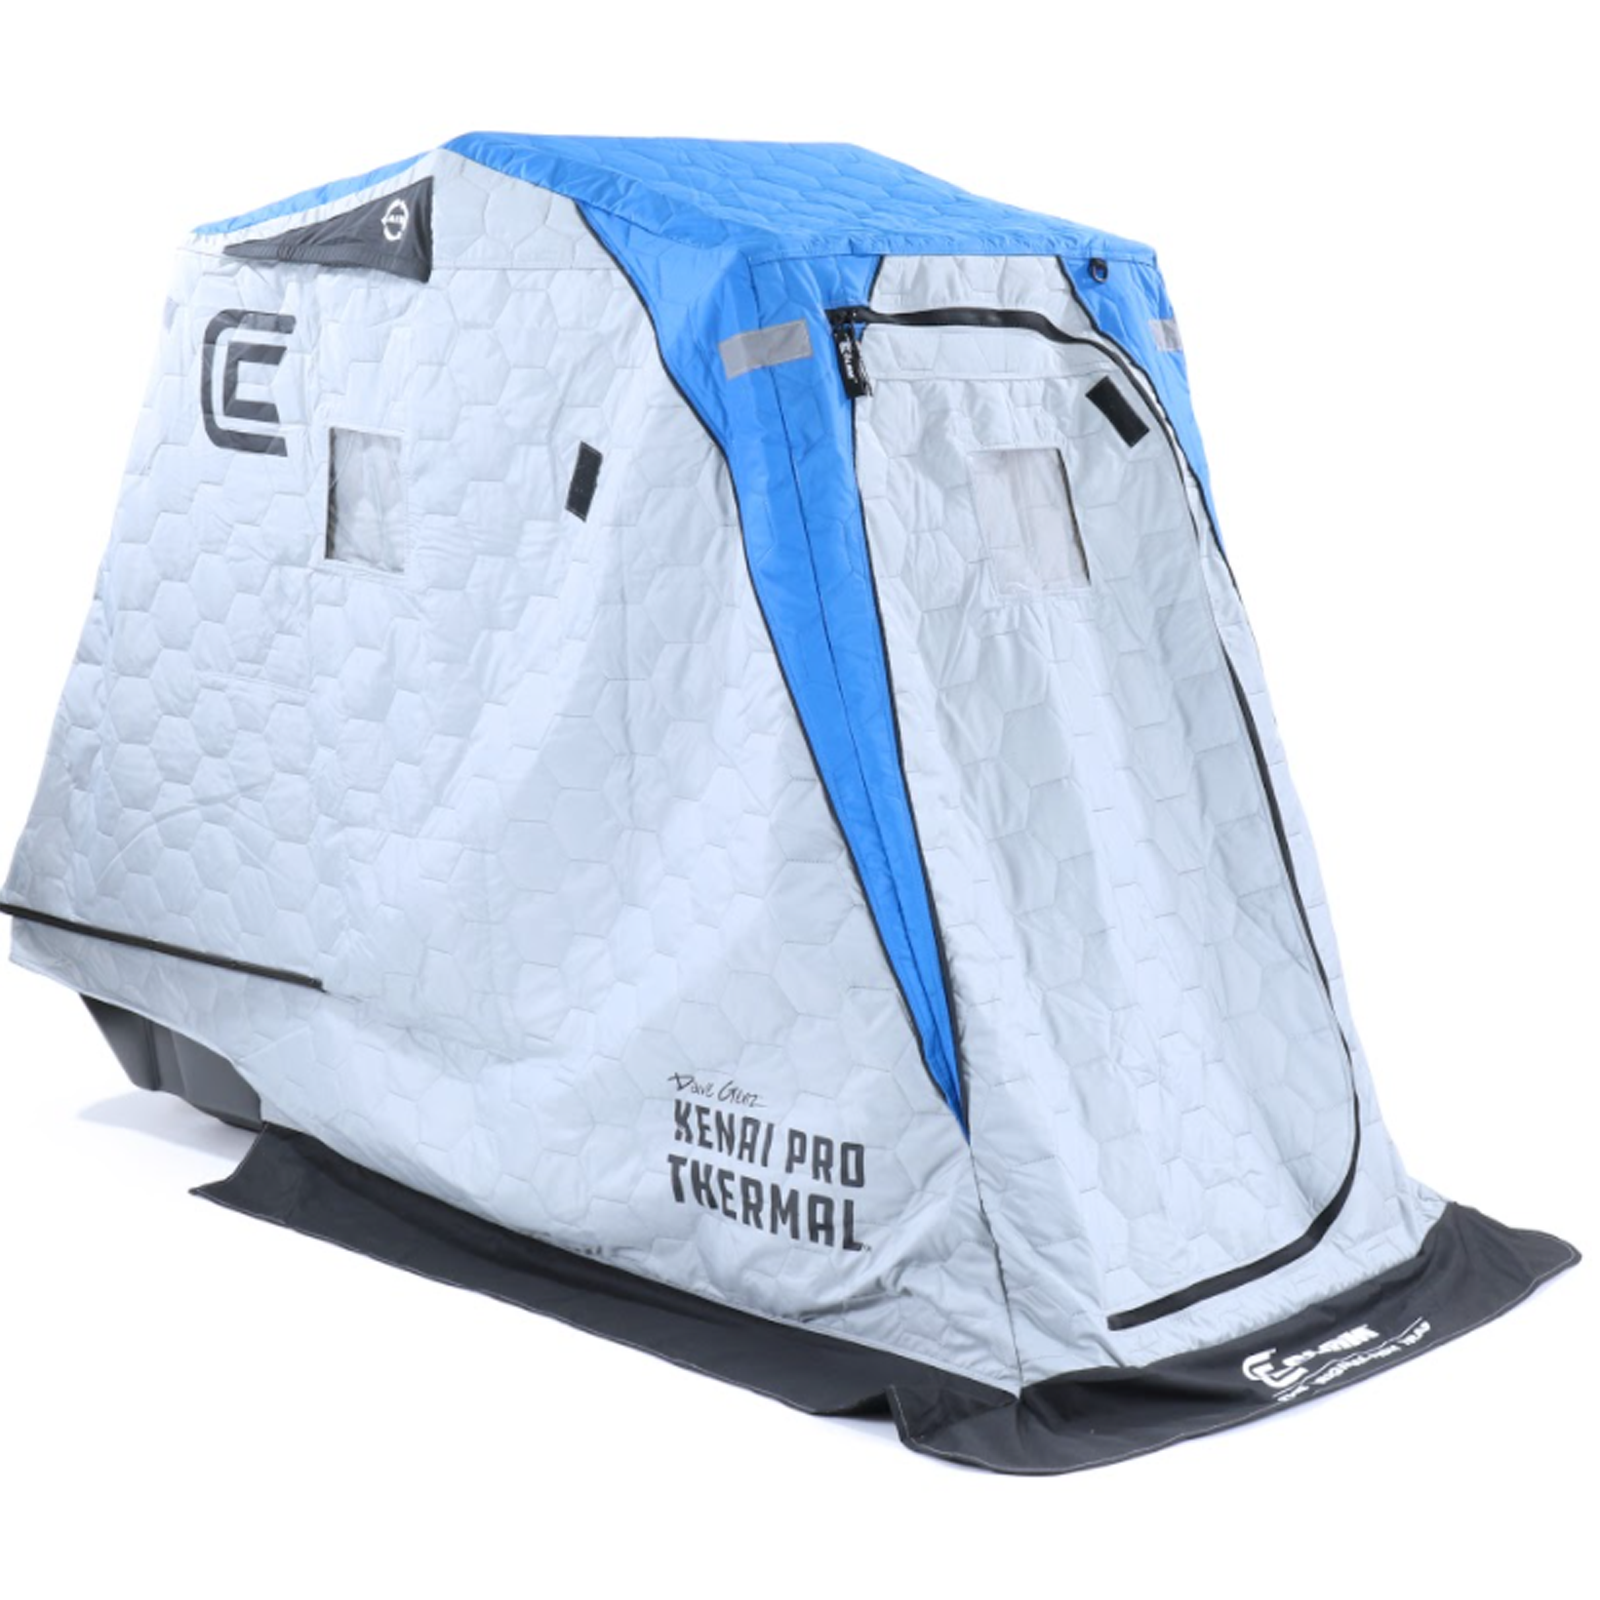 Clam Outdoors Kenai Pro Thermal Ice Shelter